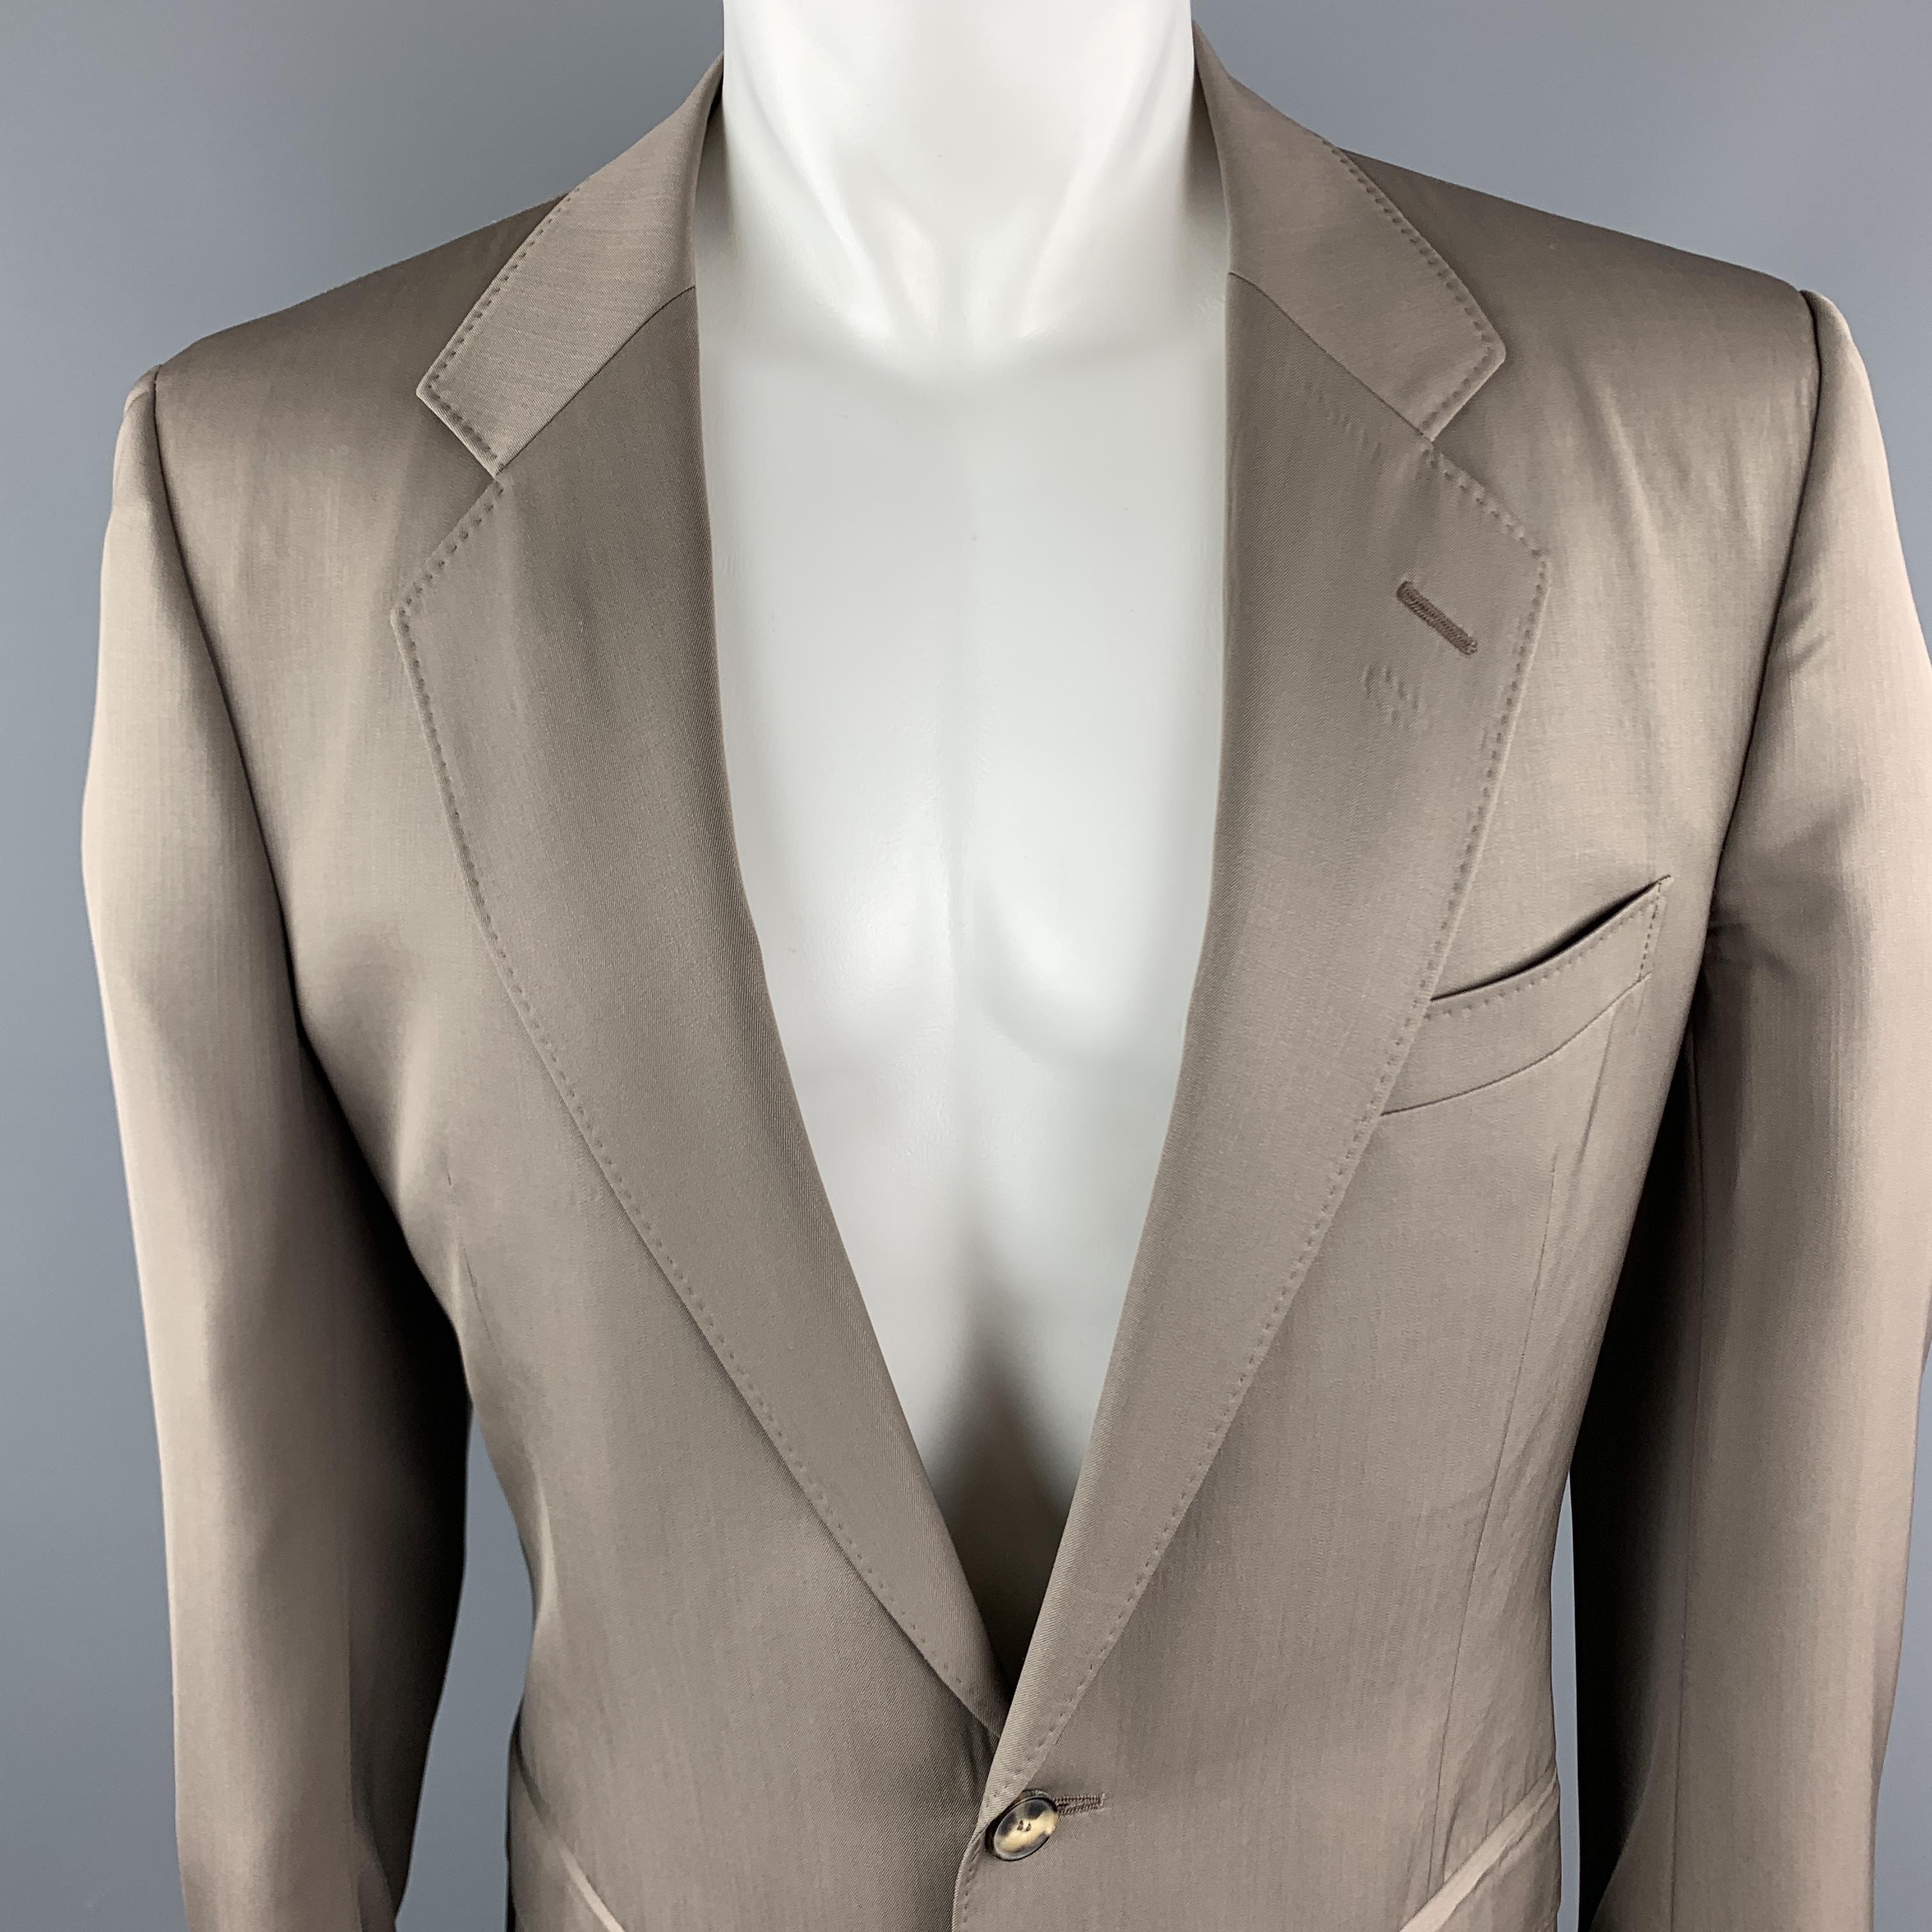 Vintage YVES SAINT LAURENT Rive Gauche suit comes in a taupe wool and includes a single breasted, two button sport coat with a notch lapel and matching flat front trousers. Made in Switzerland. 

Excellent Pre-Owned Condition.
Marked: 52